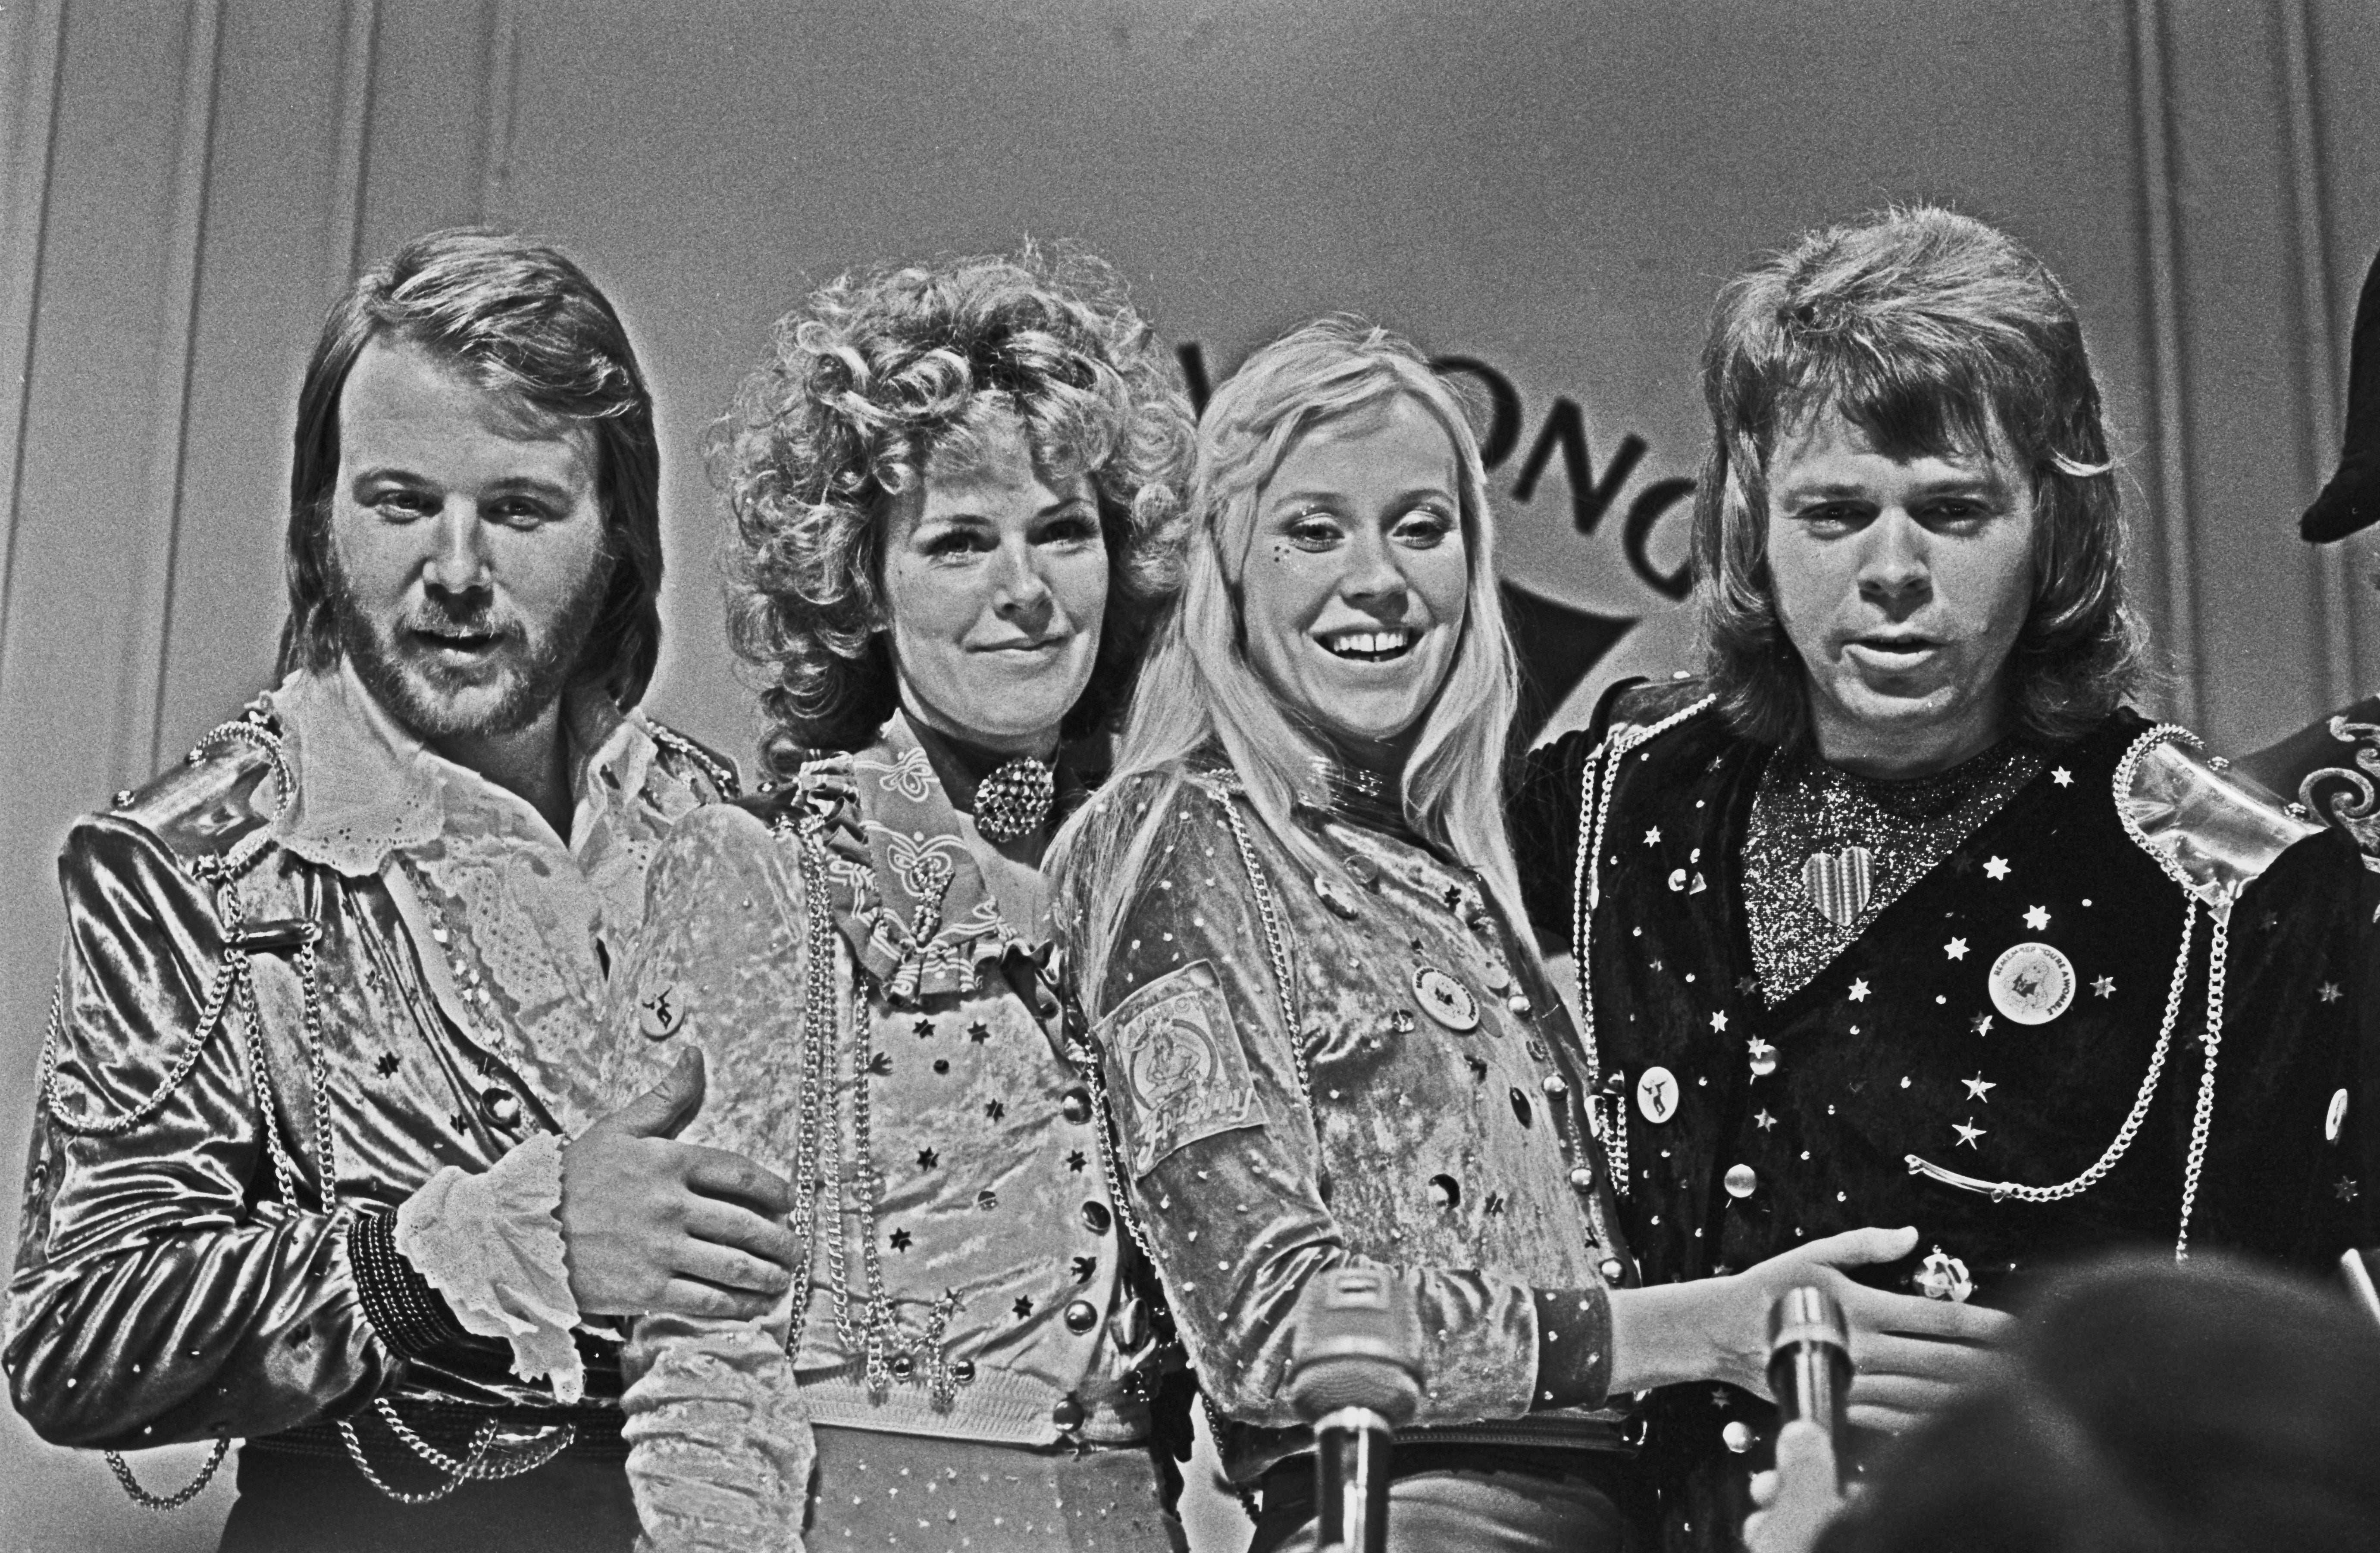 Abba at the Eurovision Song Contest in 1974